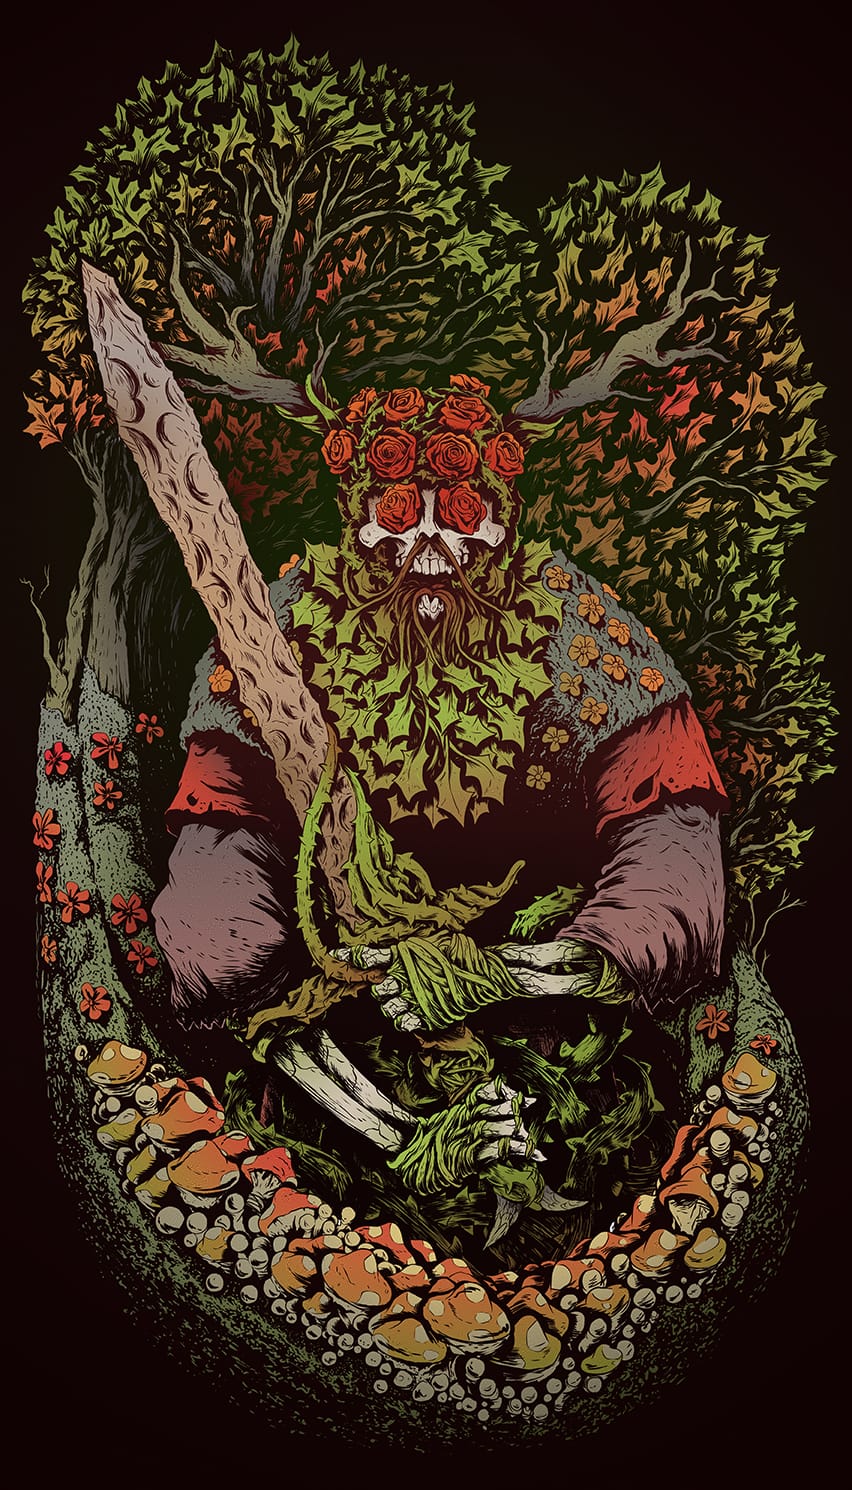 greenman-finished-small